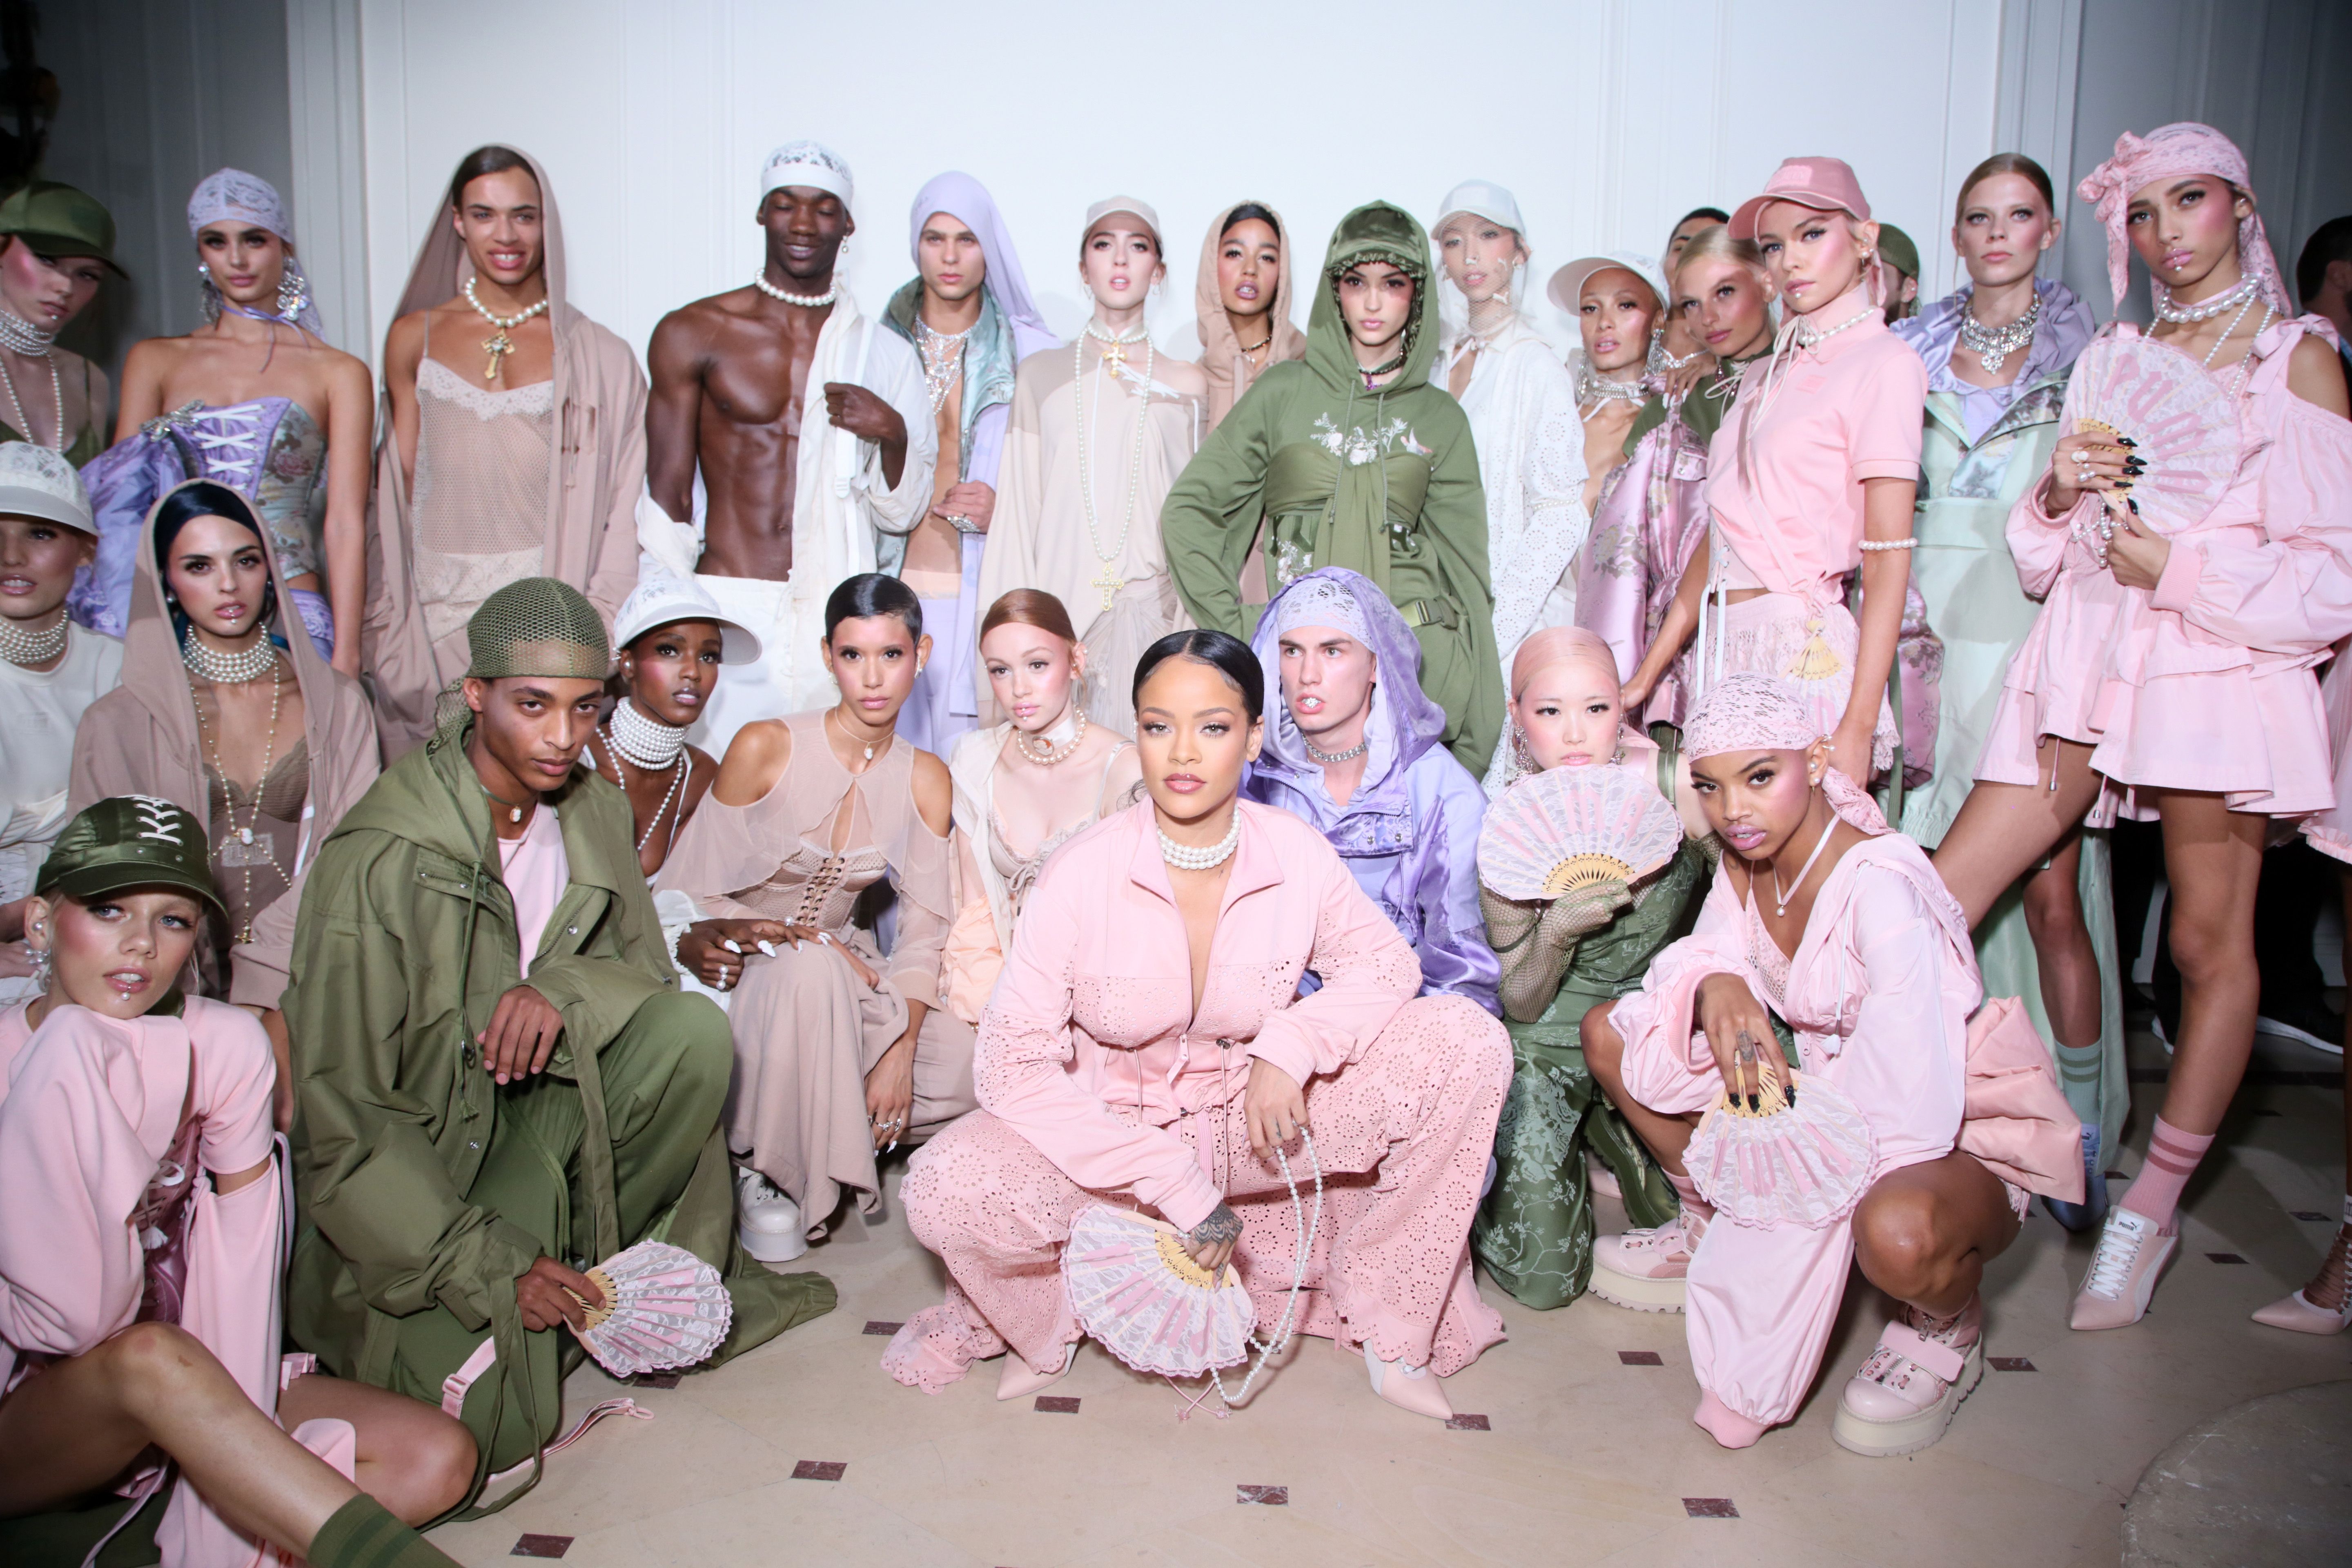 Rihanna's New 'Fenty' Fashion Line With 'LVMH' Is Coming